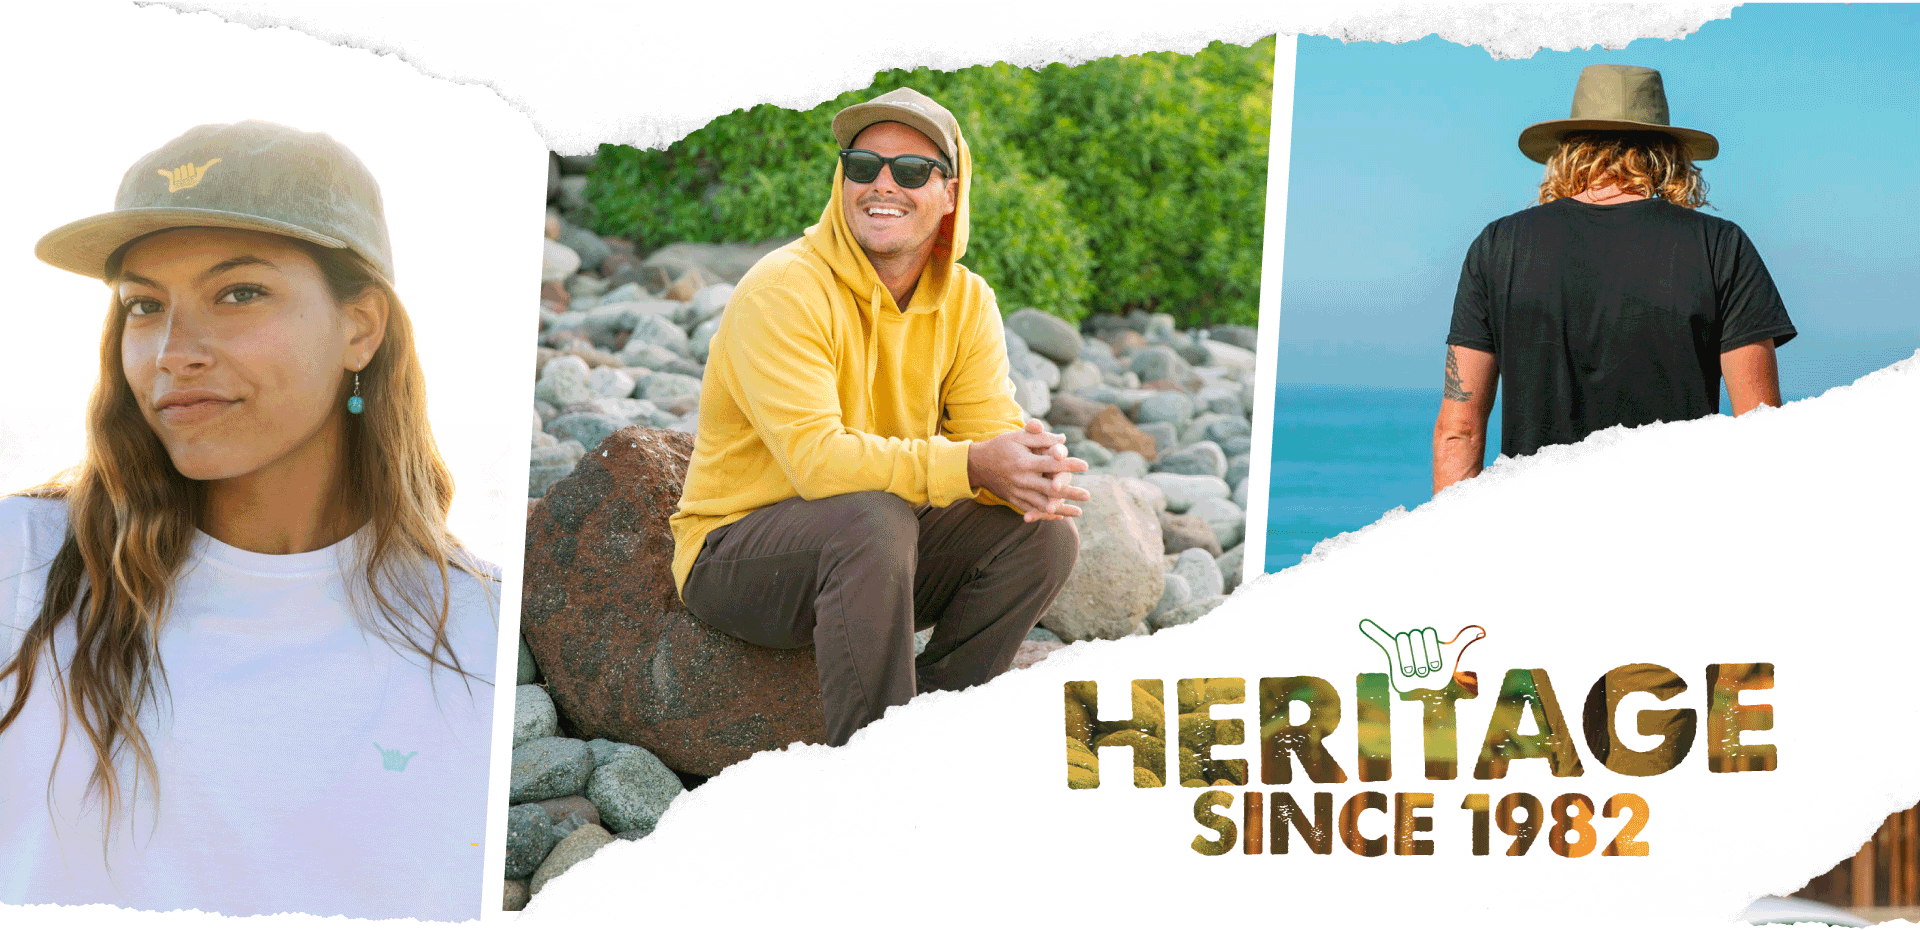 Hang Loose - The Original Surf Lifestyle brand since 1982